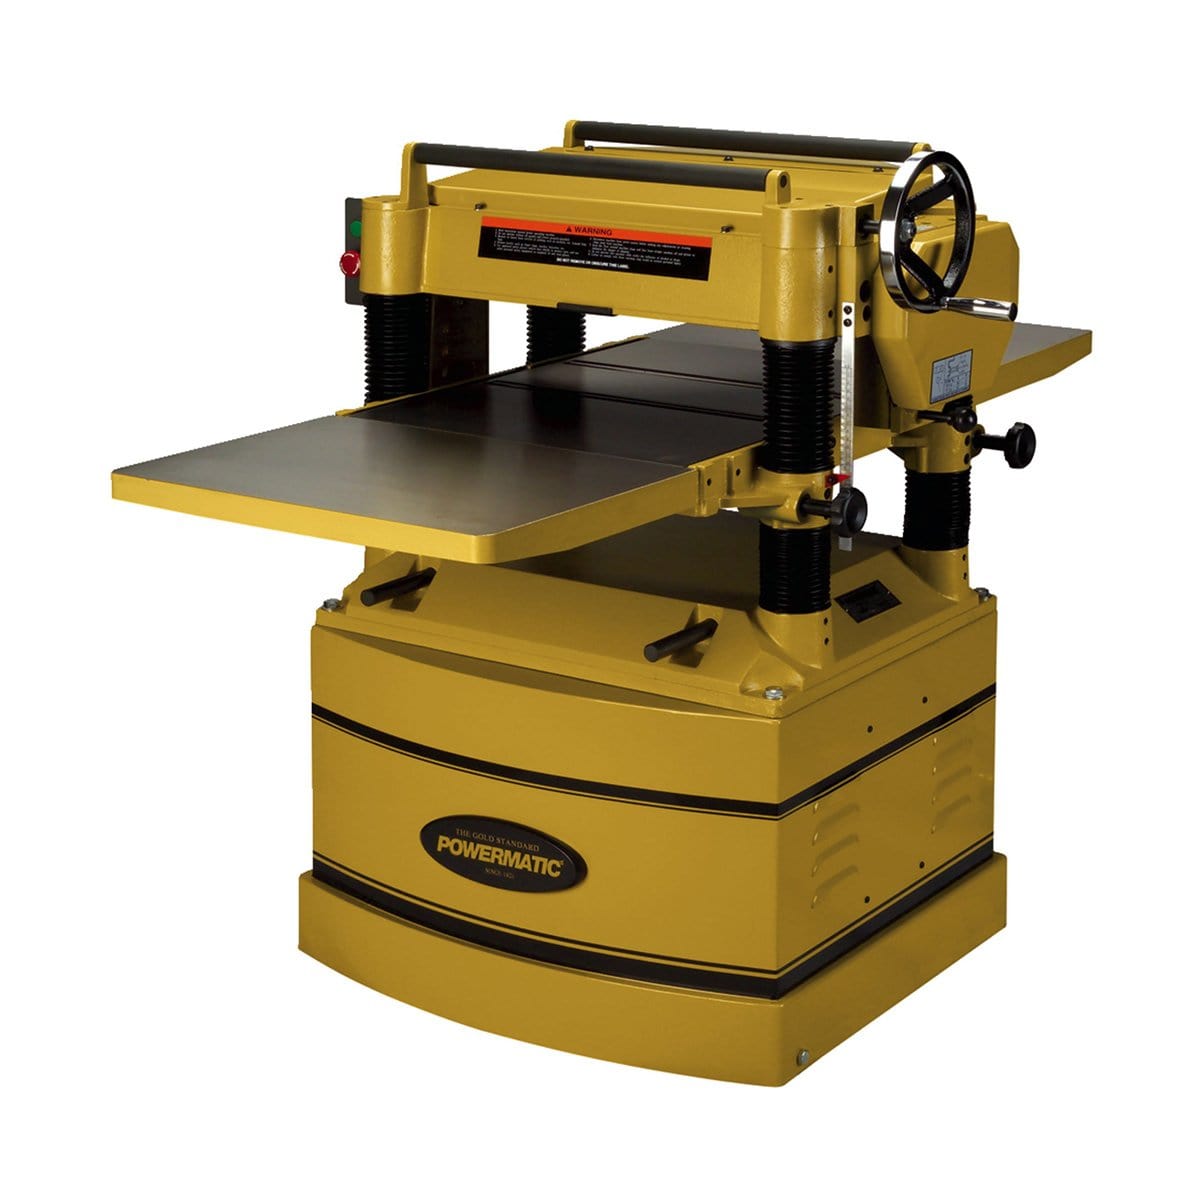 Powermatic 1791315 Planer 209HH-1 20" Planer with Helical Head 5HP 1-Phase